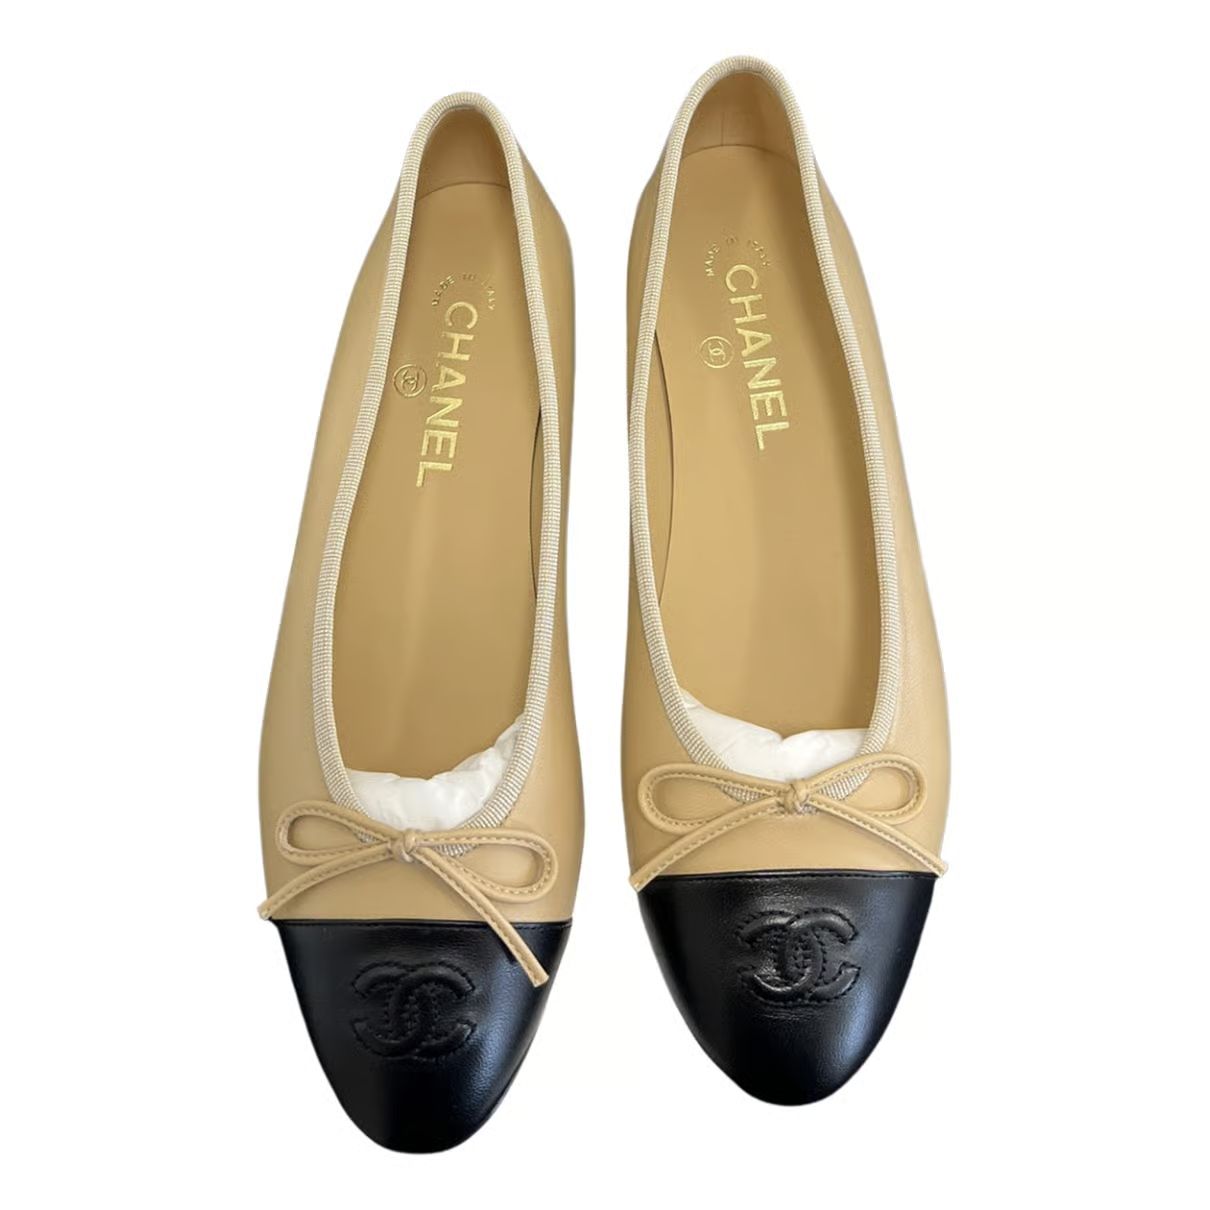 Cambon leather ballet flats Chanel Beige size 38.5 EU in Leather - 35605727 | Vestiaire Collective (Global)